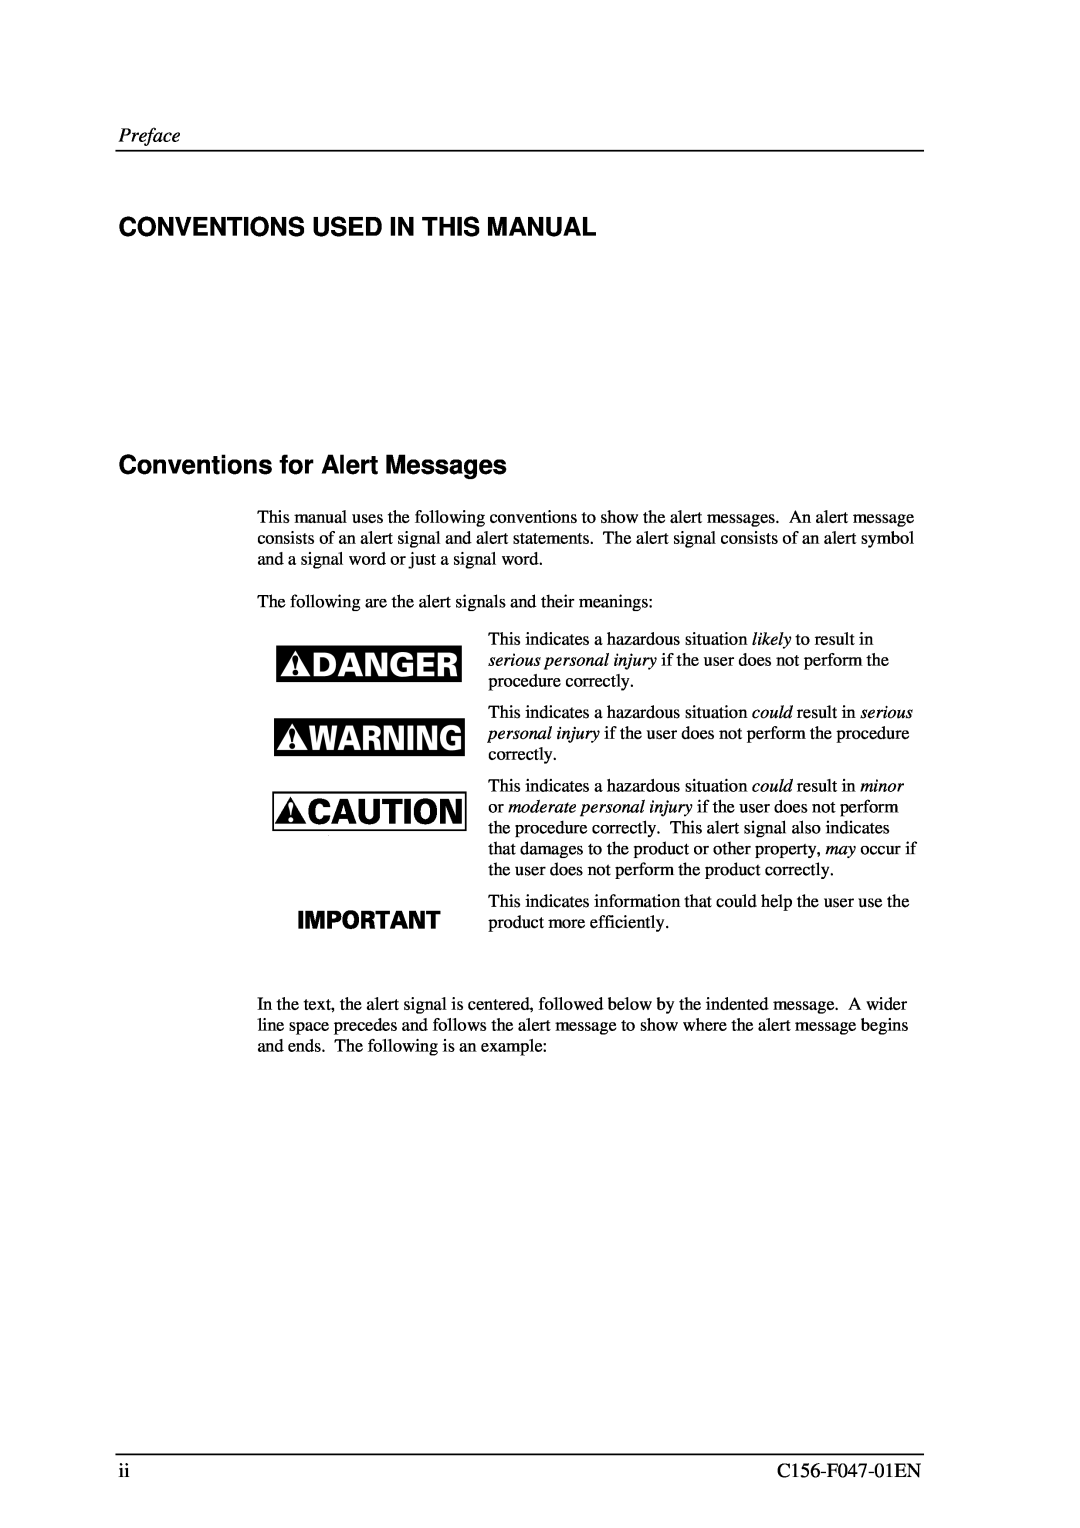 Fujitsu MDG3230UB manual CONVENTIONS USED IN THIS MANUAL Conventions for Alert Messages, Preface 